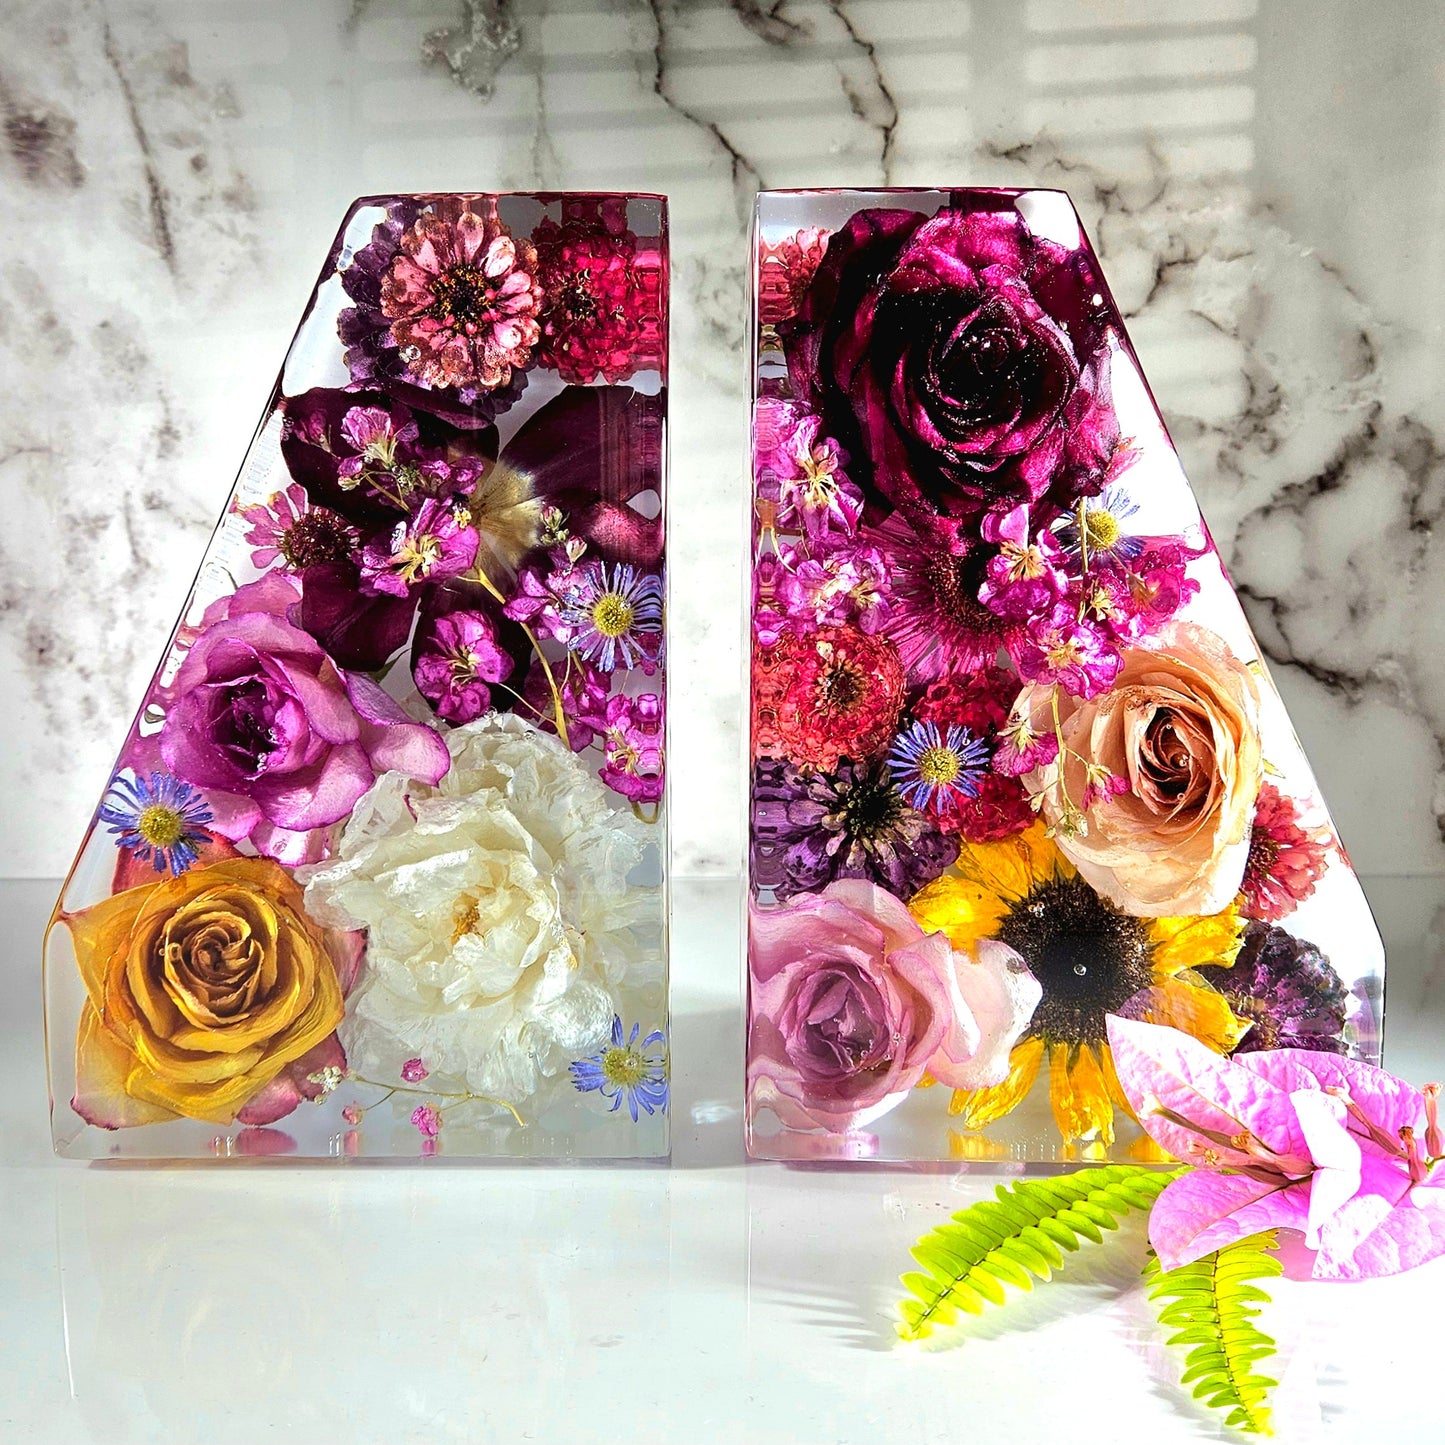 XL Bookends 3D Resin Wedding Bouquet Preservation Floral Gift Keepsake Save Your Wedding Flowers Forever